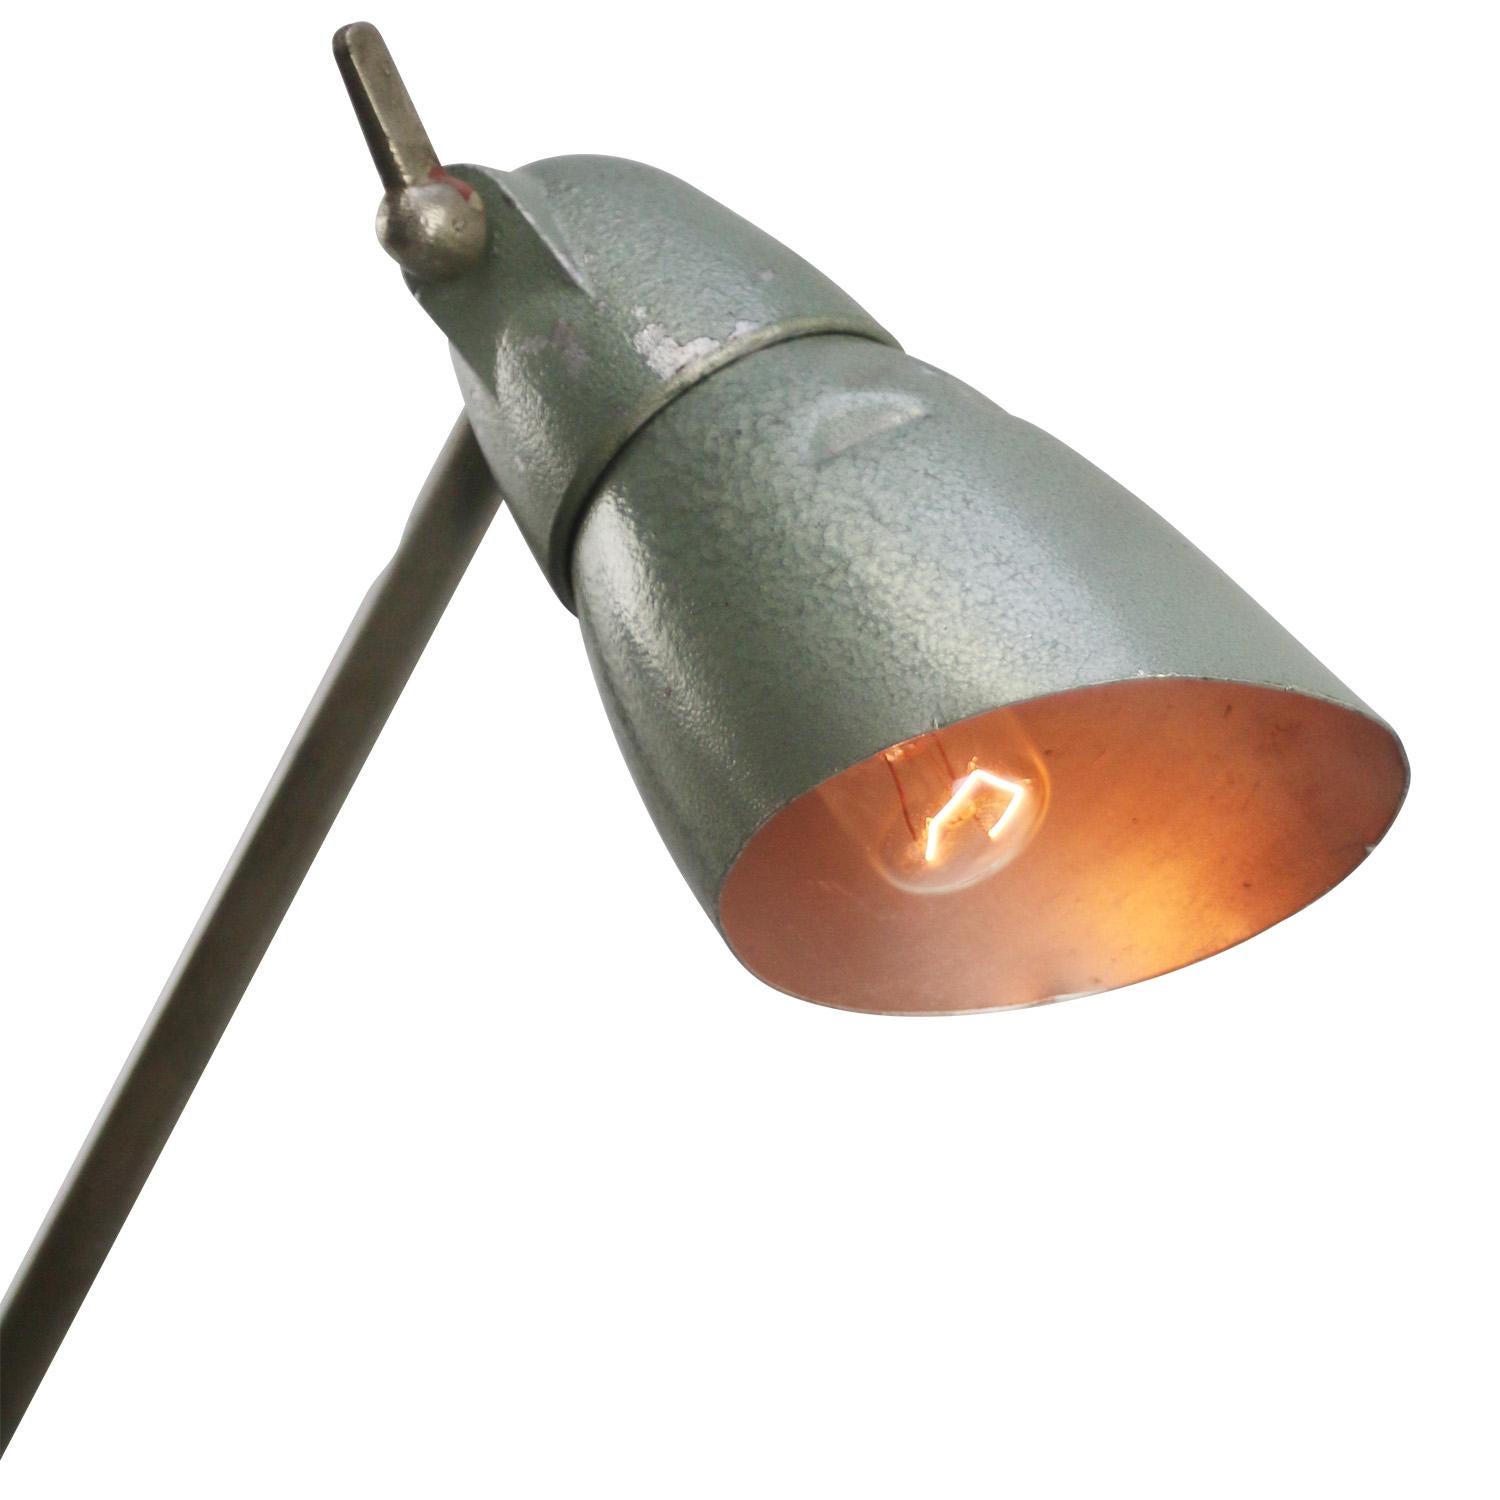 Industrial table / work light ‘Pfaff’ with bakelite shade by Lumina, France
Including plug and switch in base

Available with UK / US plug

Bulb holder : B15 

Priced per individual item. All lamps have been made suitable by international standards